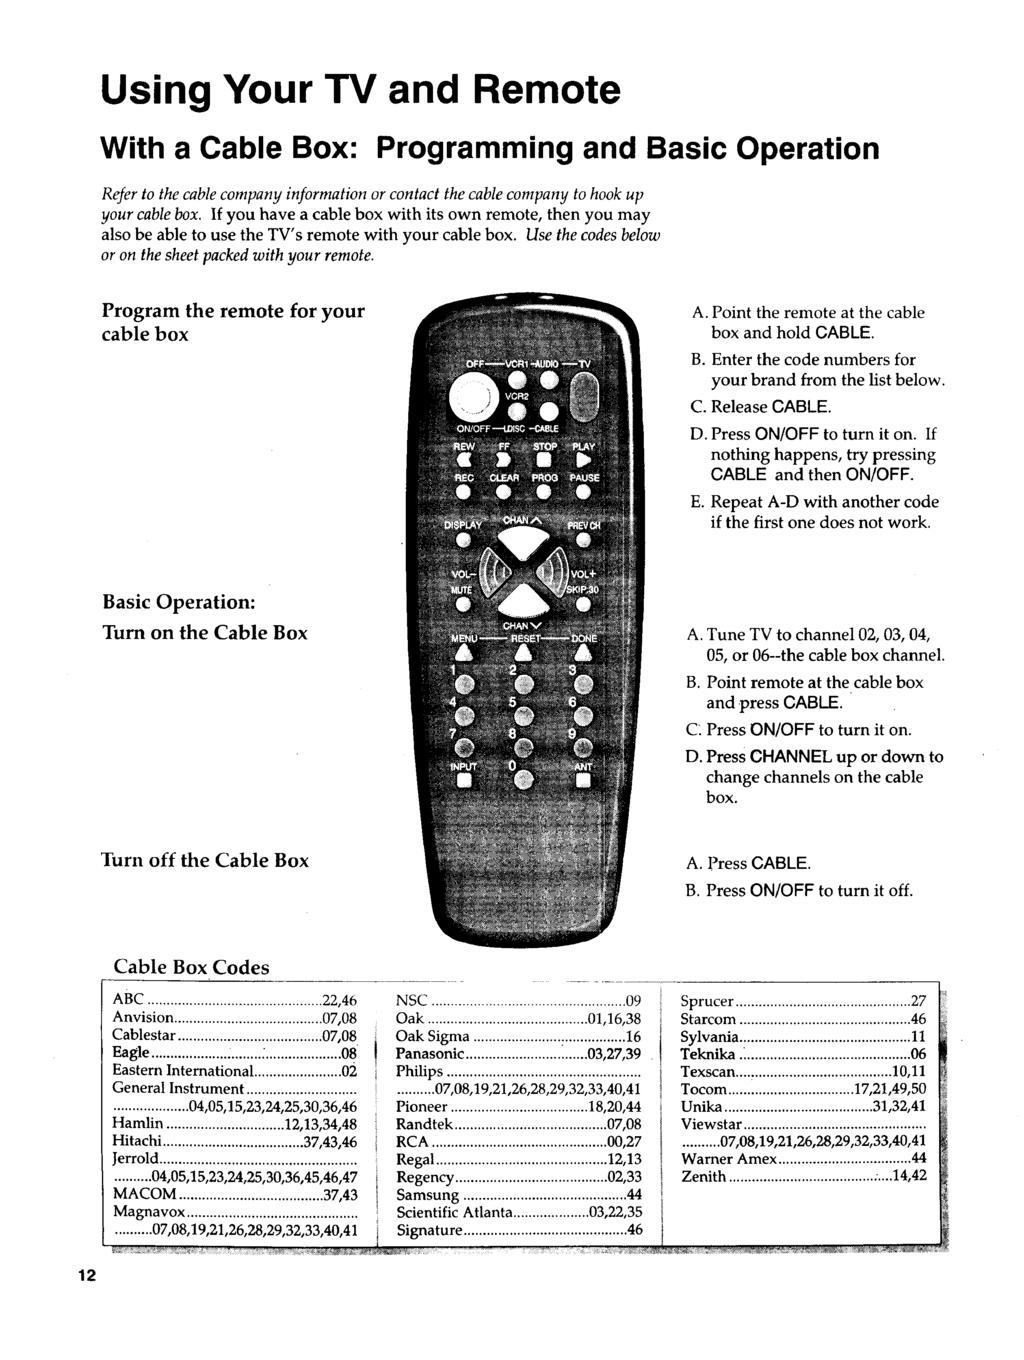 Using Your TV and Remote With a Cable Box: Programming and Basic Operation Refer to the cable company information or contact the cable company to hook up your cable box.